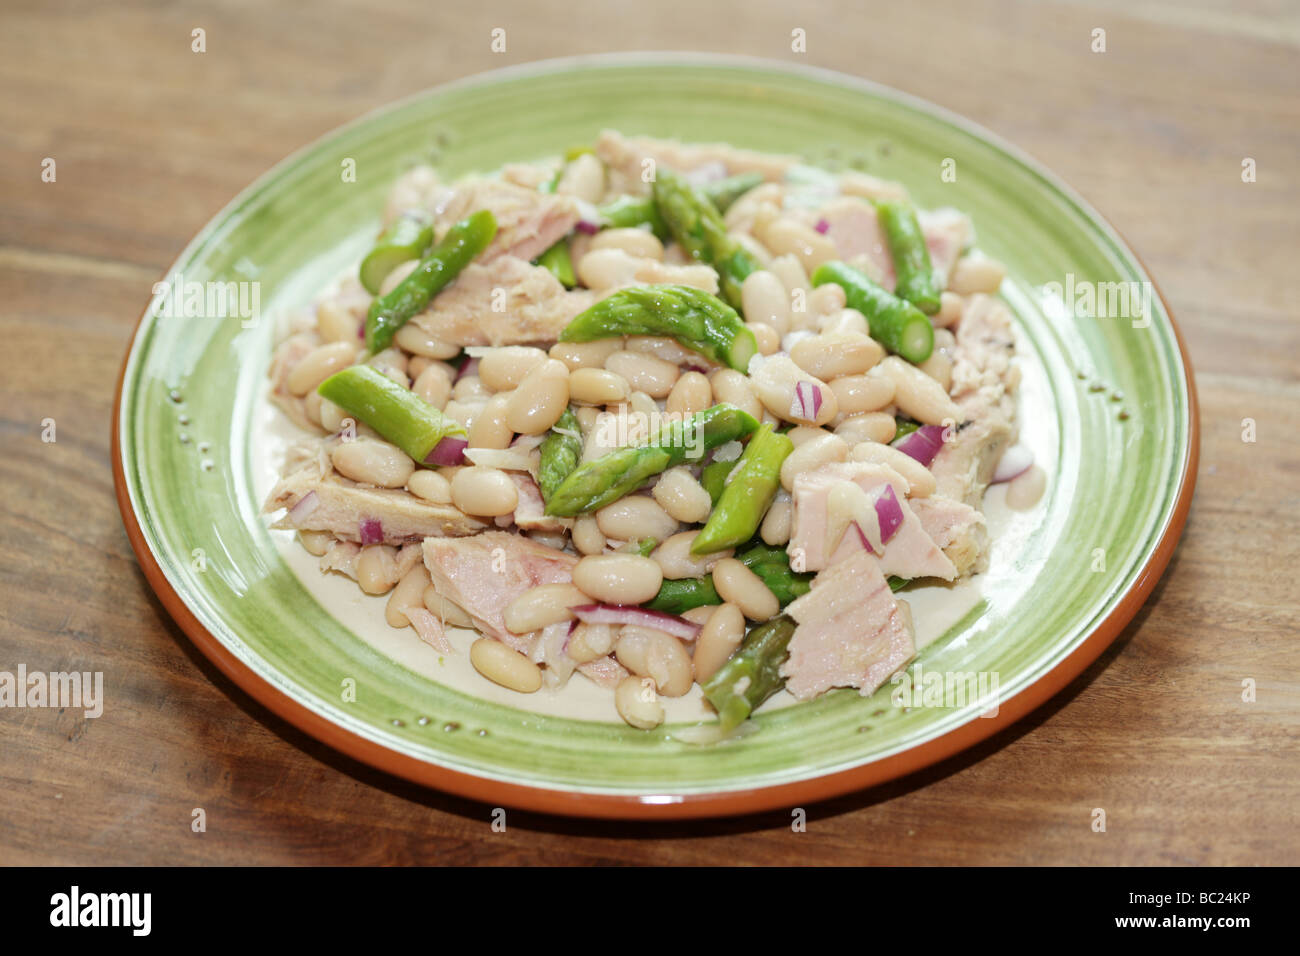 Fresh Healthy Tuna Fish and Asparagus Salad With Cannelloni Beans And No People Stock Photo